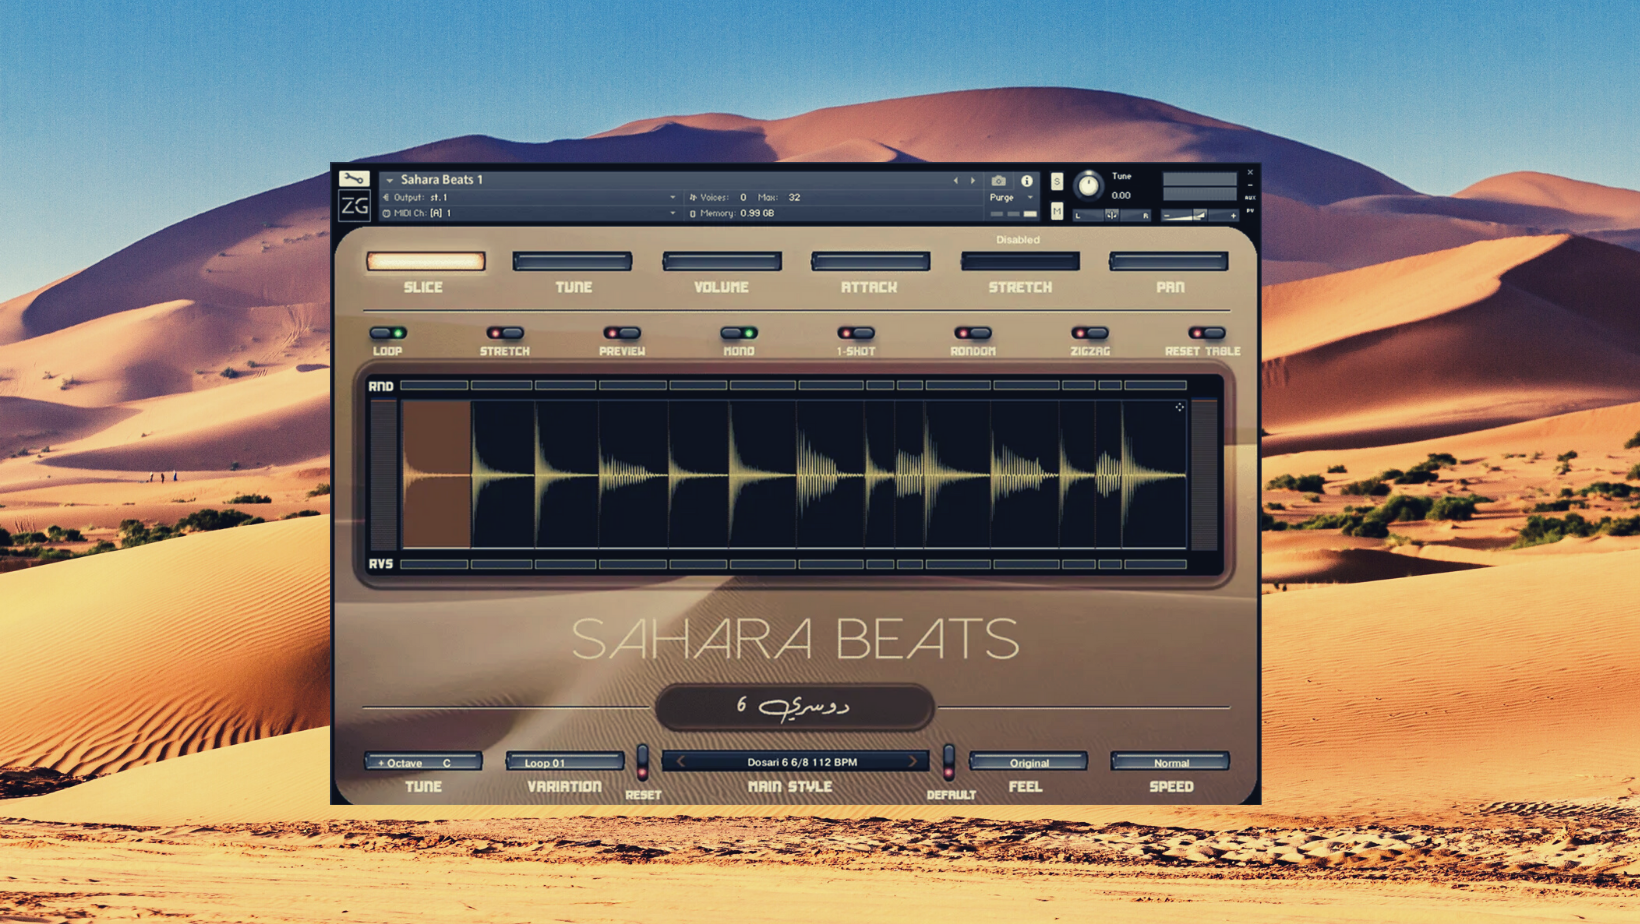 Review of Zero-G Sahara Beats: A Unique Kontakt Instrument Featuring Exotic Percussive Beats and Grooves from the Middle East and North Africa